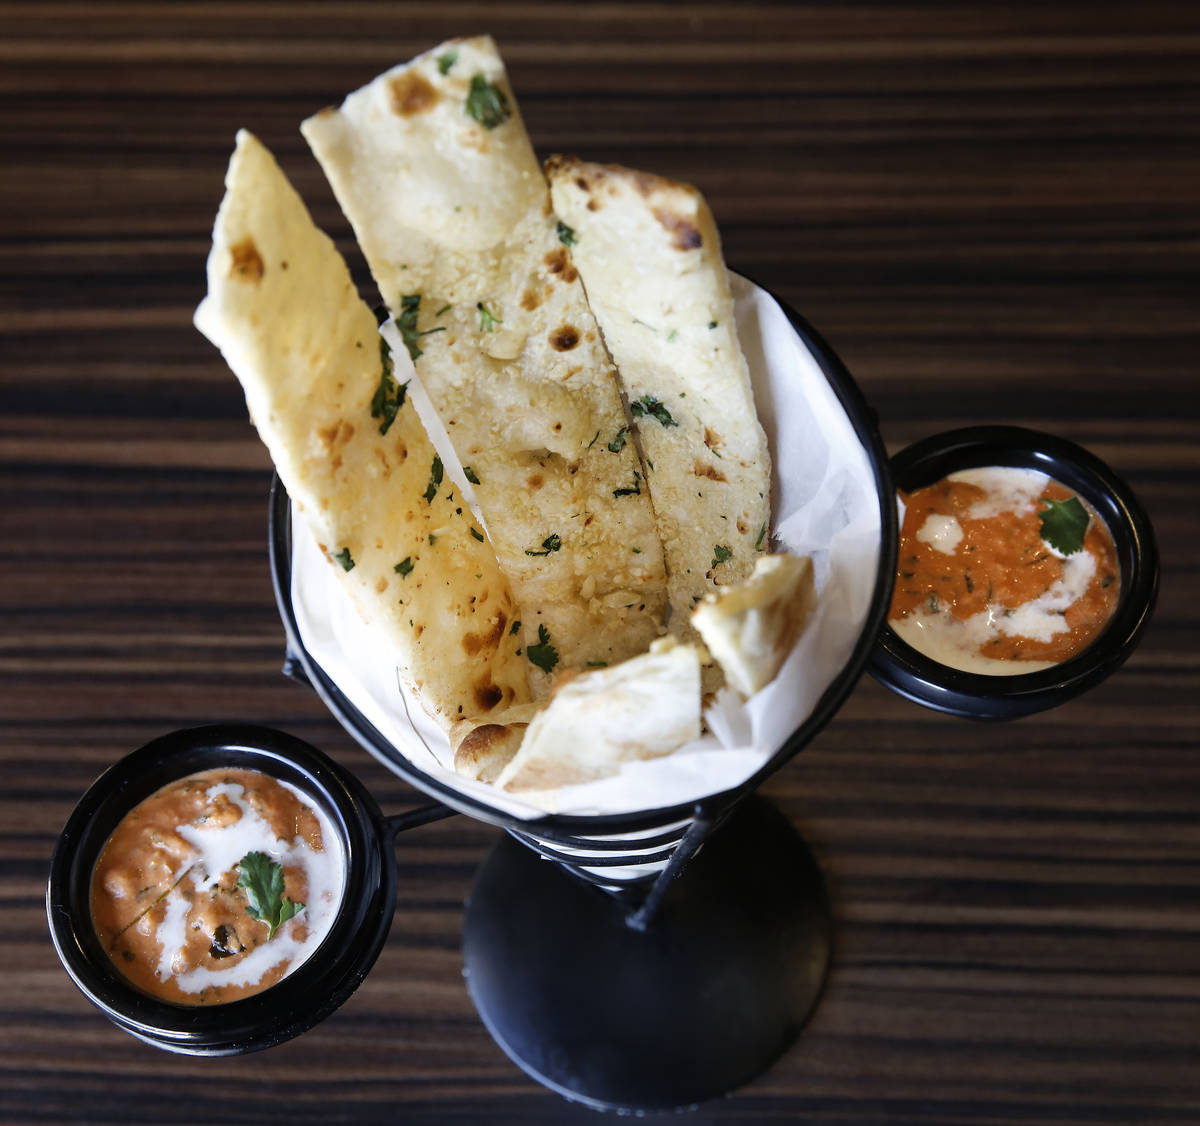 Mint Indian Bistro locations at 730 E. Flamingo Road and 4246 S. Durango Drive are open for din ...